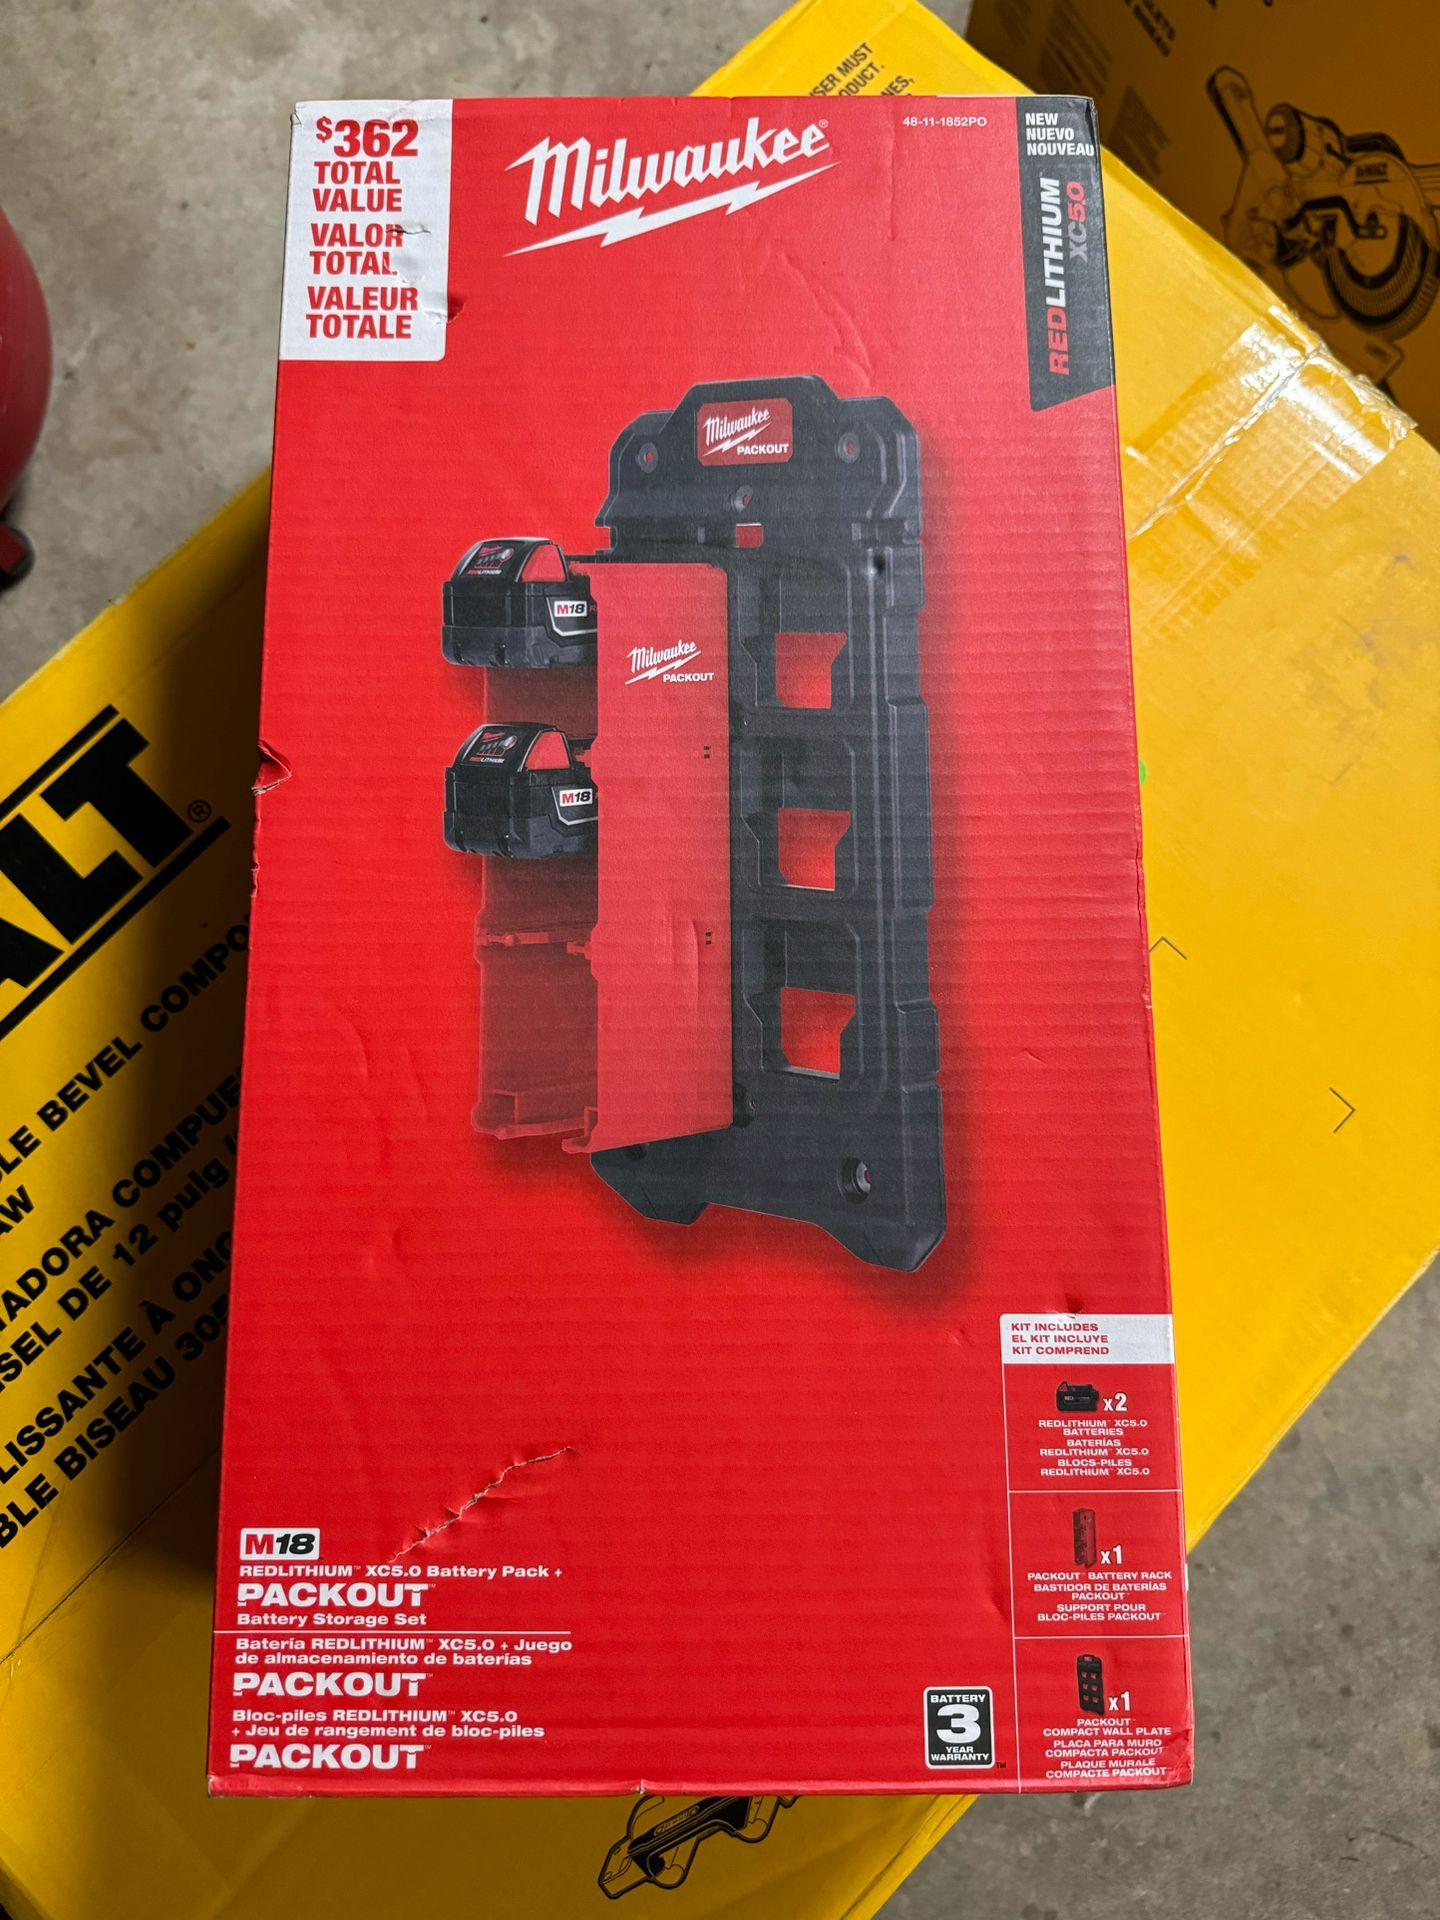 RedLithium XC5.0 2 Battery Pack + PACKOUT Battery Storage Set